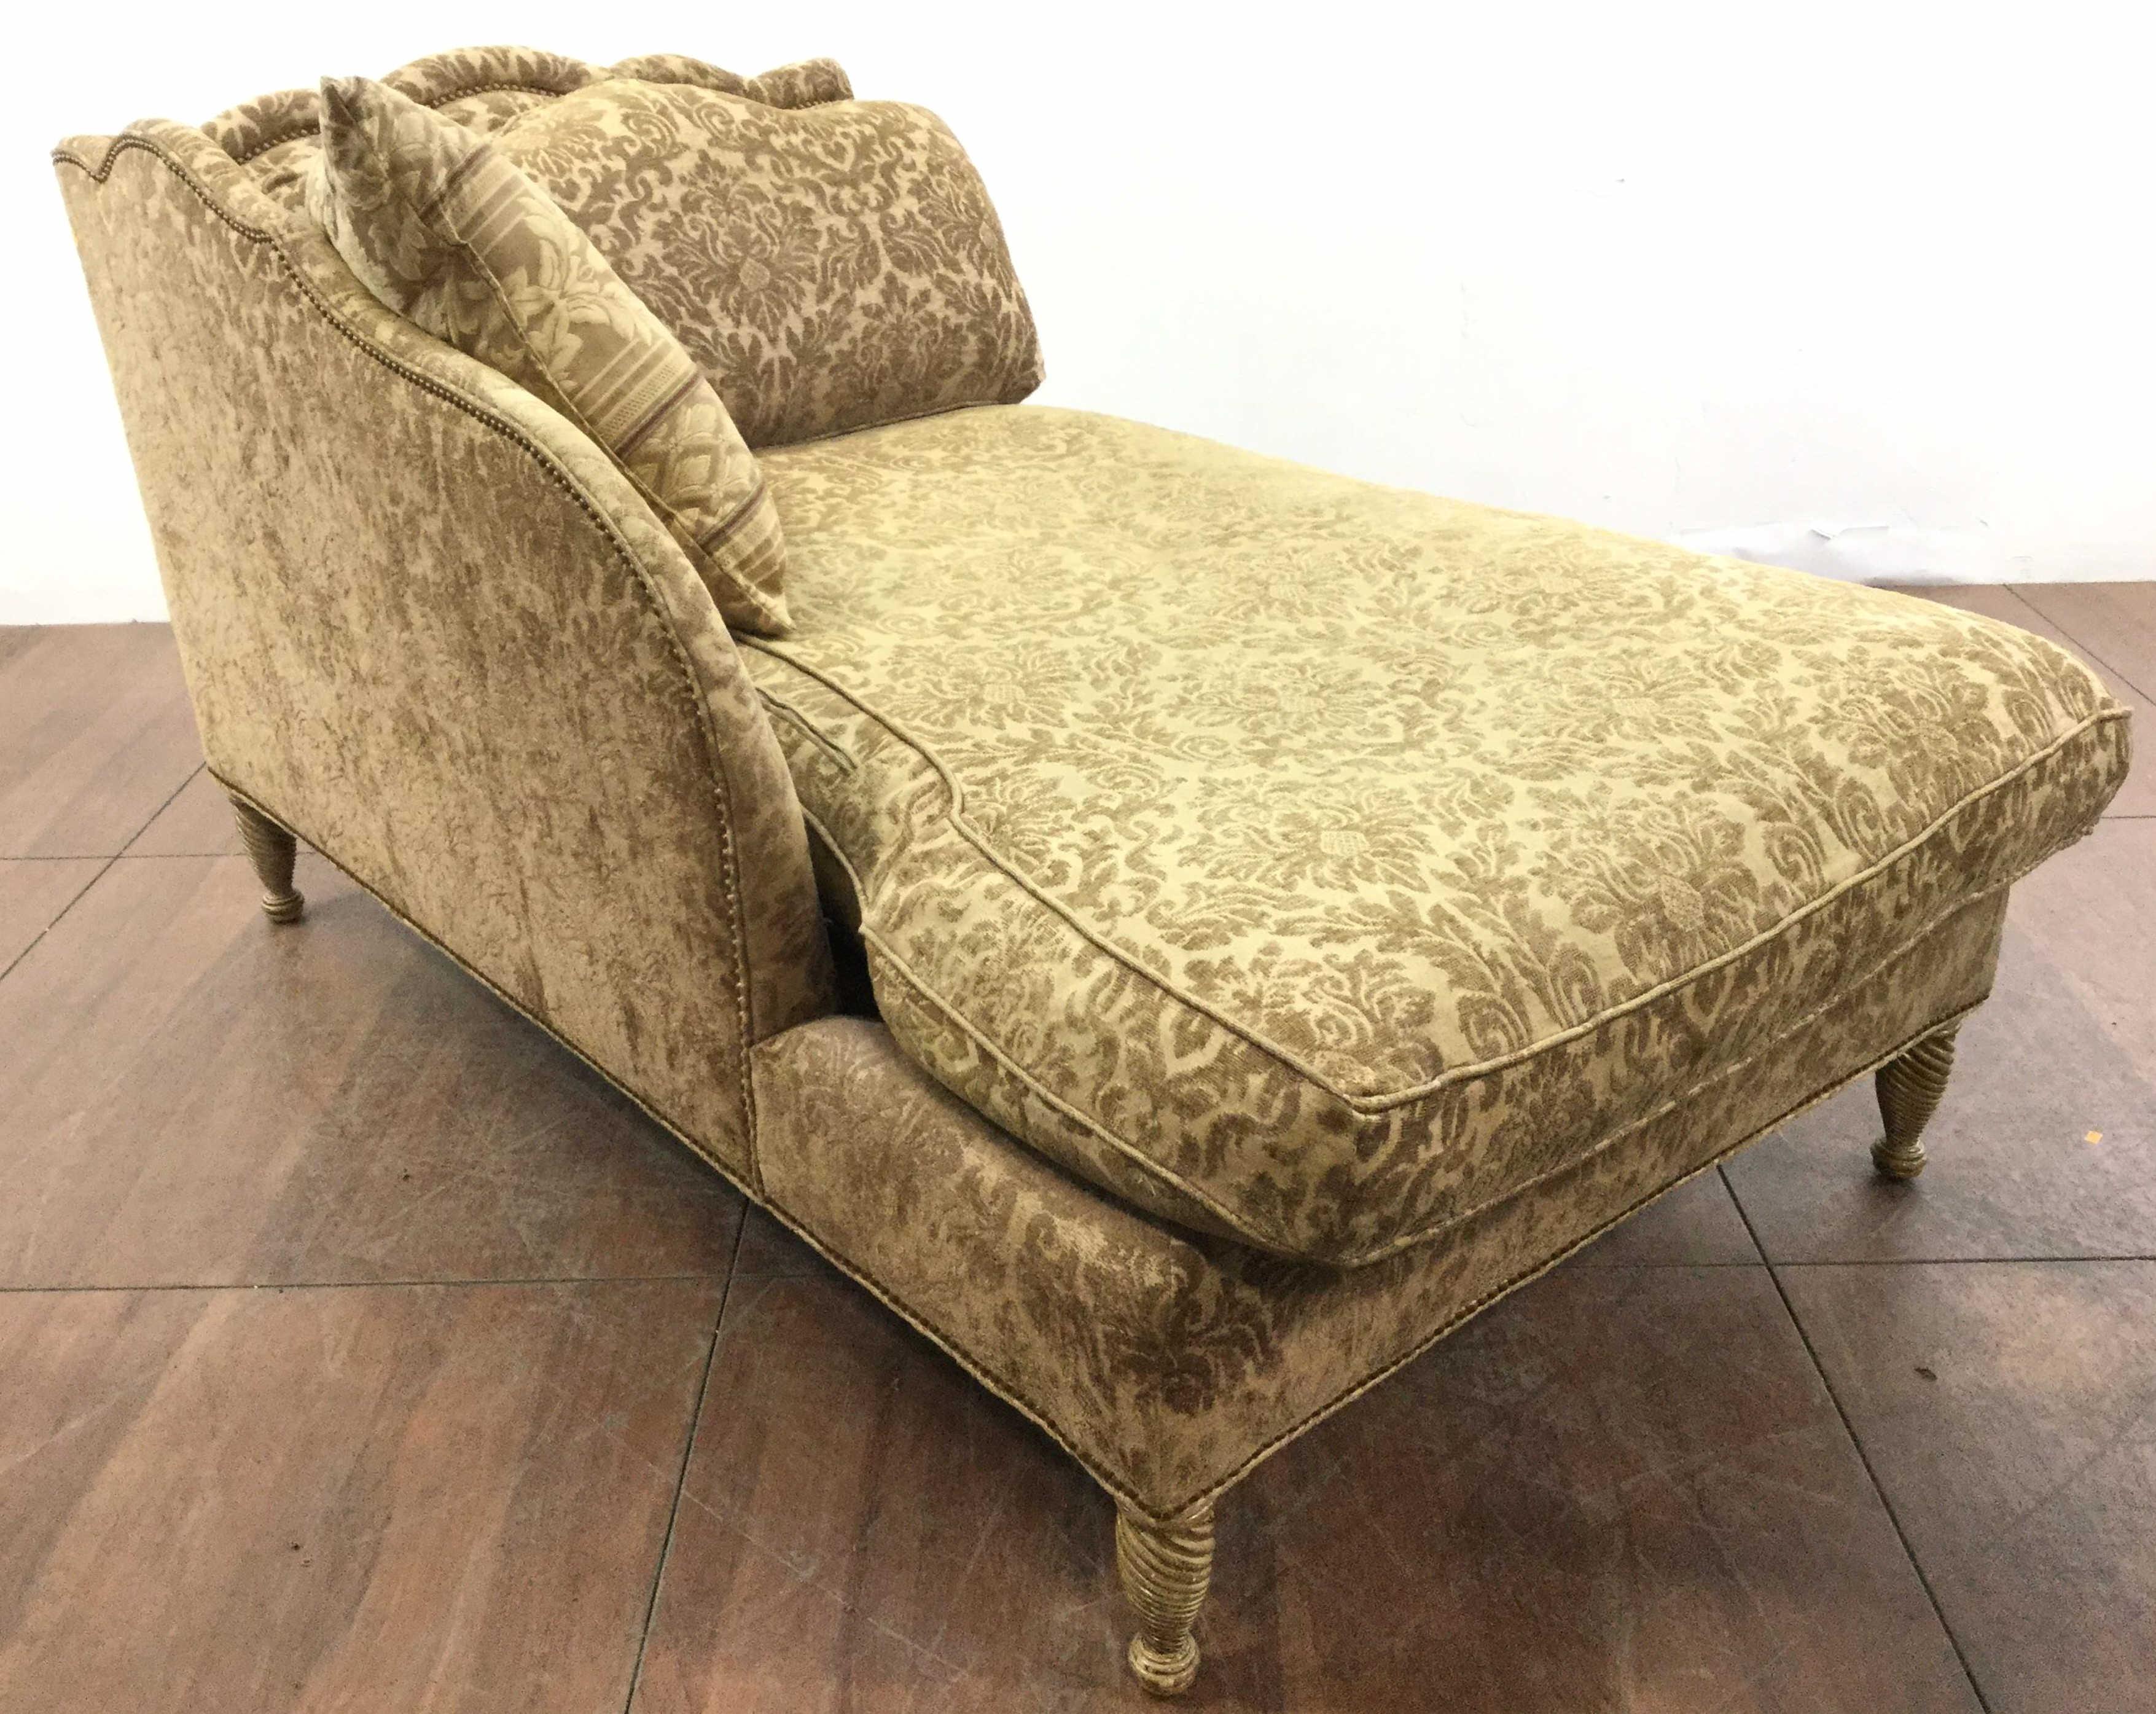 Stanford Furniture Co. Chaise Lounge